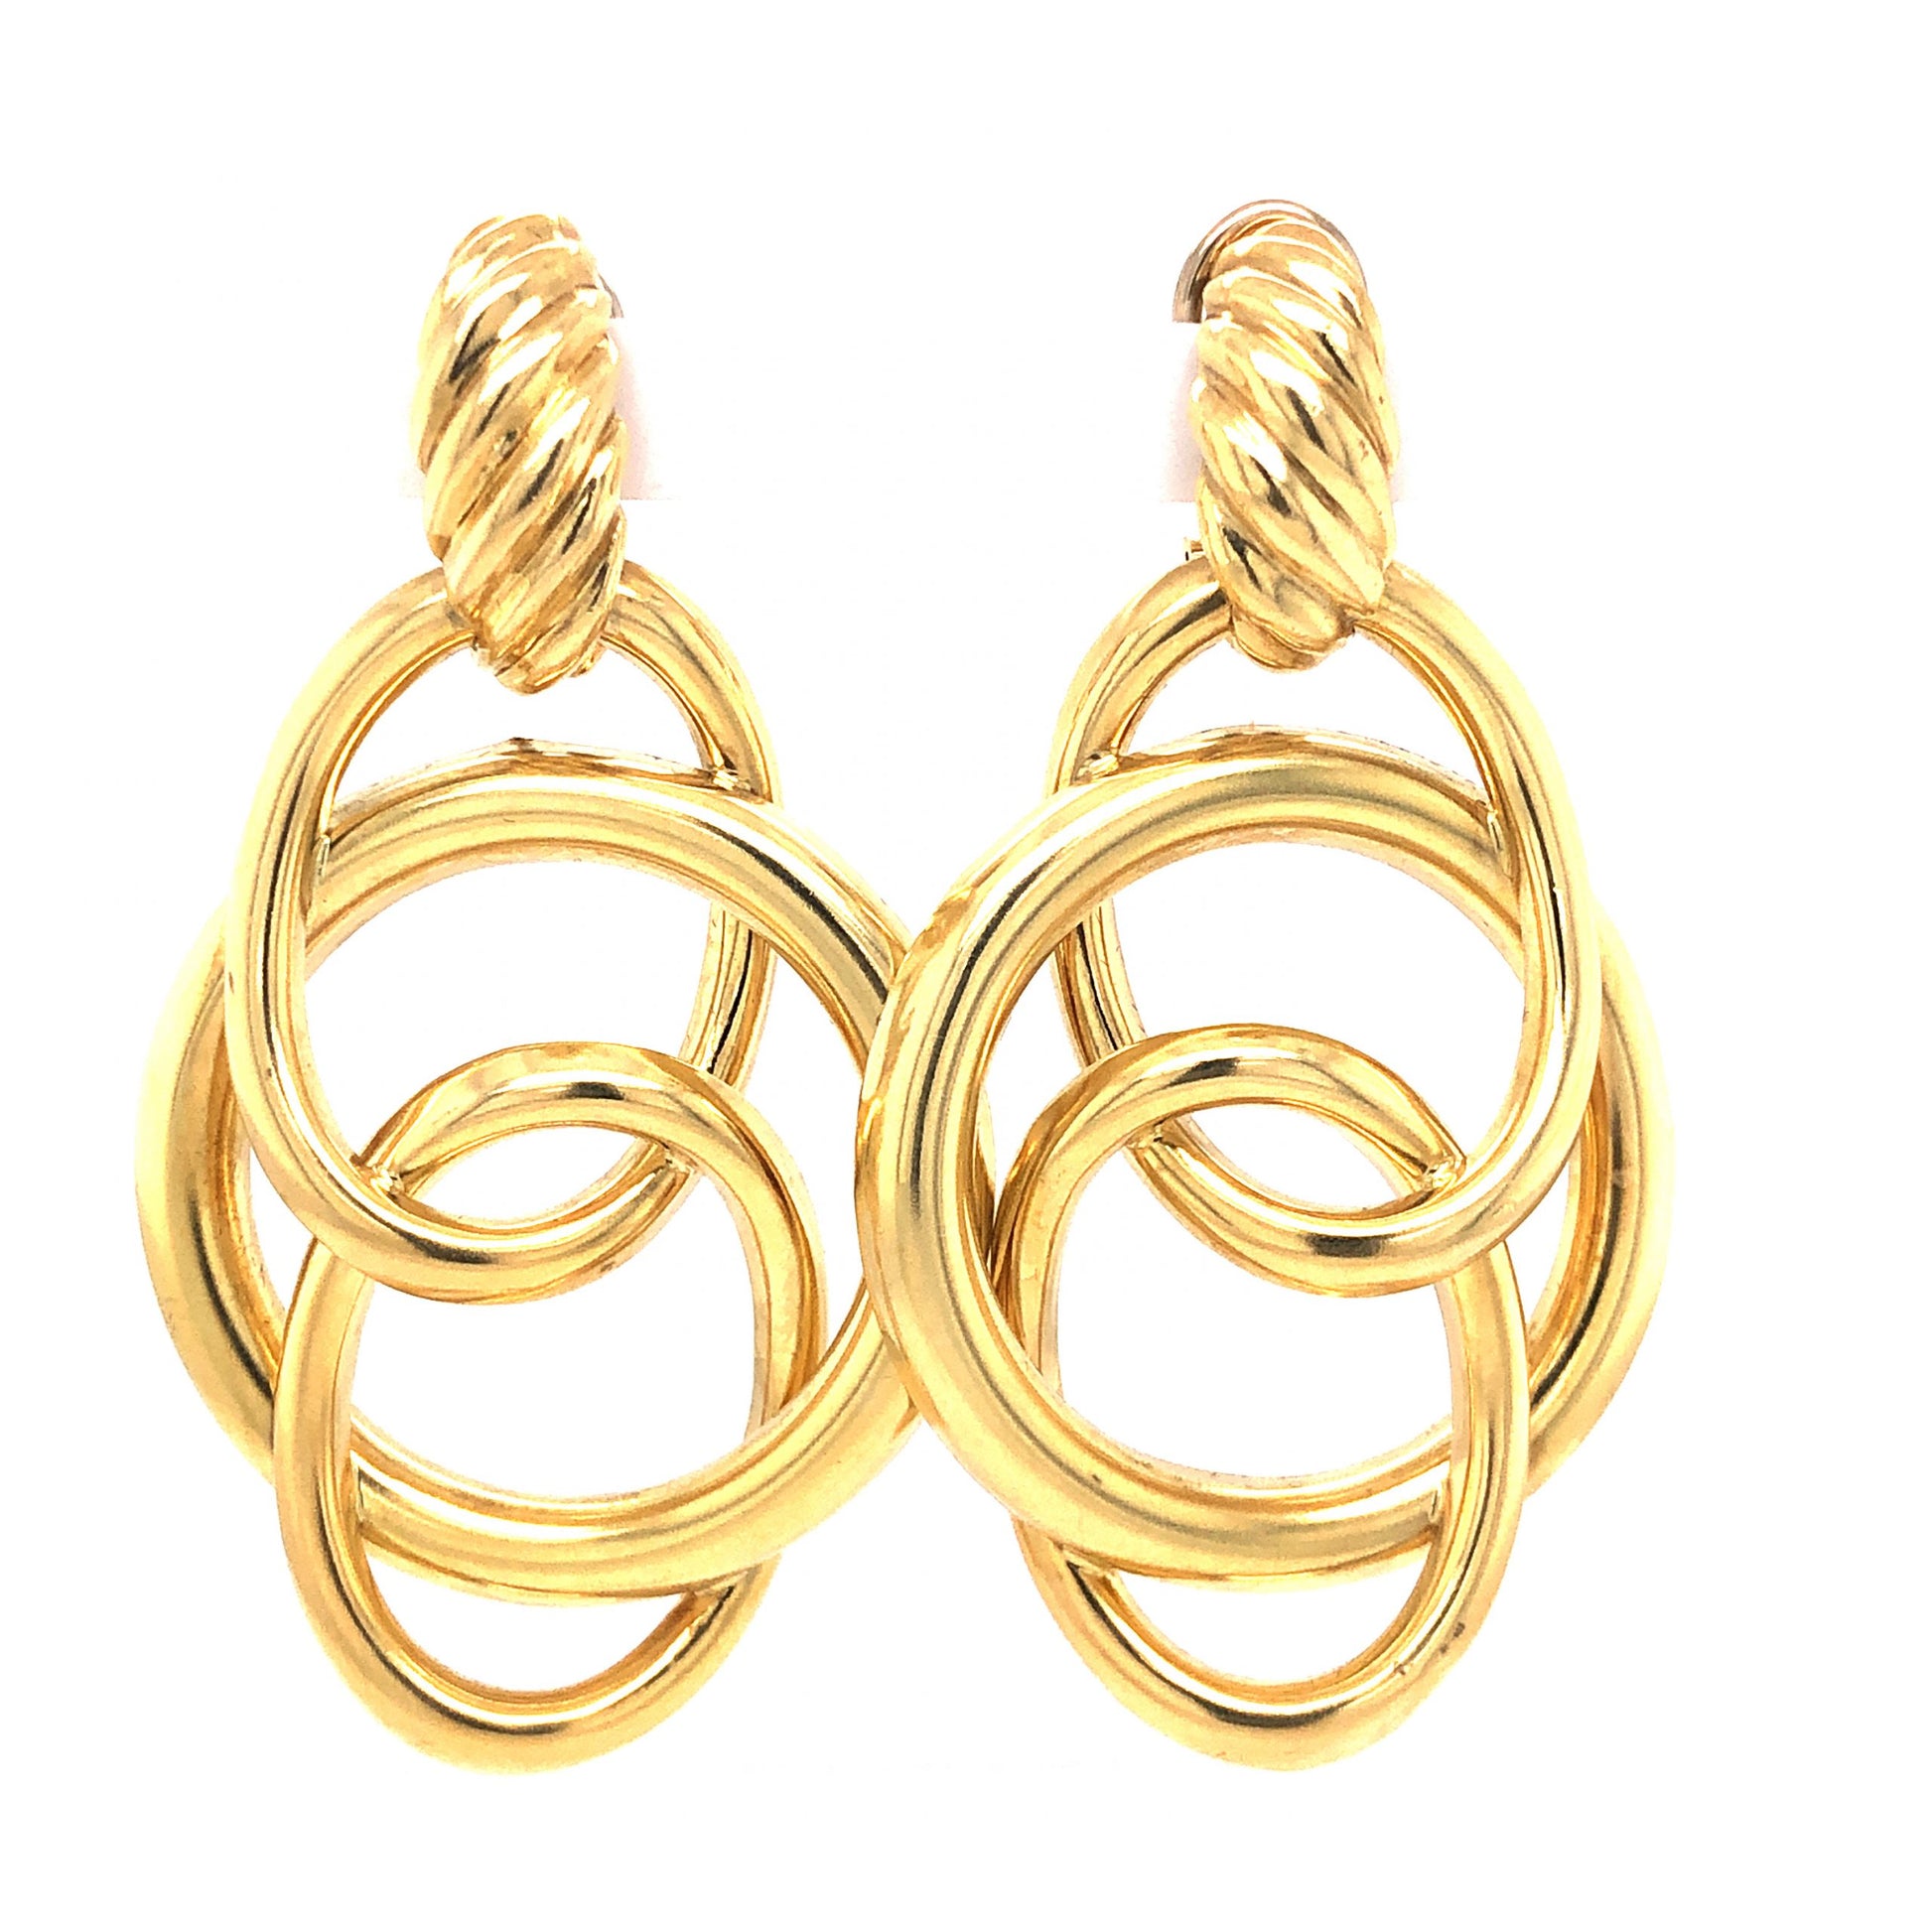 Interlaced Hoop Earrings in 18k Yellow GoldComposition: 18 Karat Yellow GoldTotal Gram Weight: 24.1 gInscription: 18k 31DAL 750 ITALY